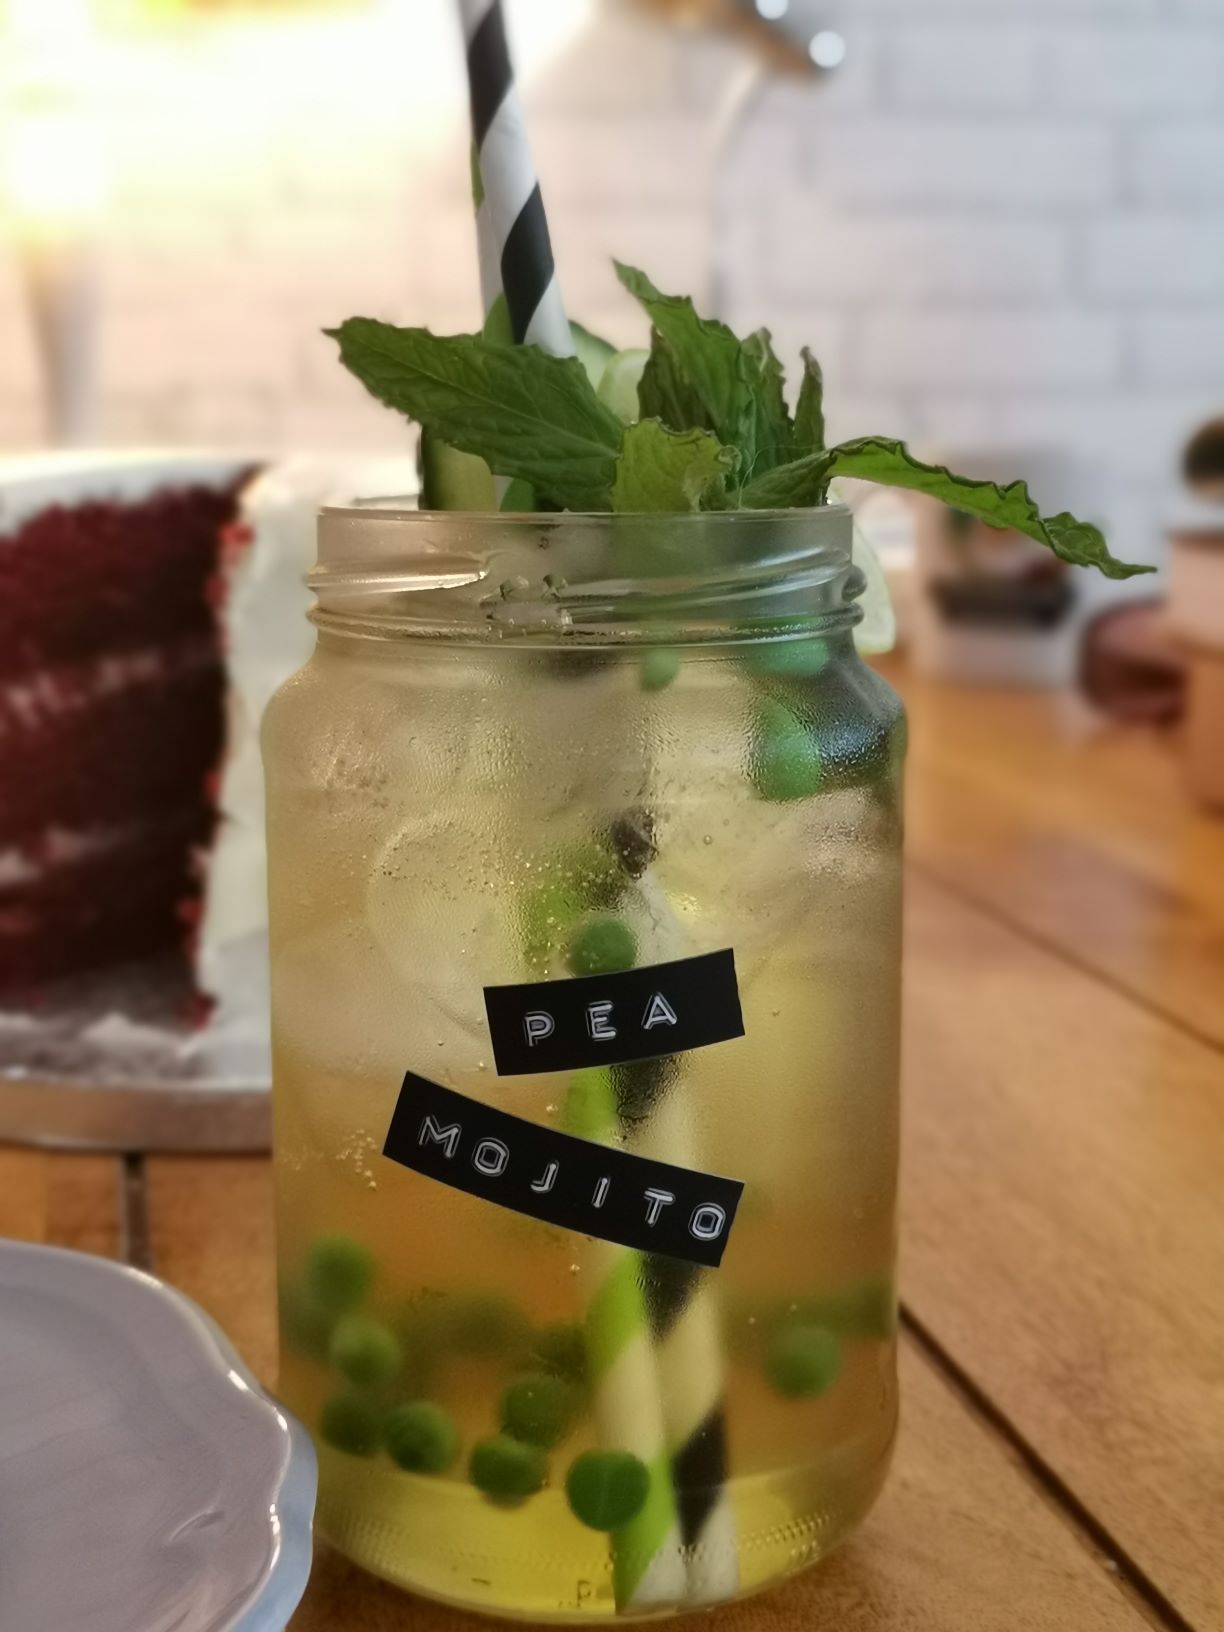 Pea mojtio from The Twisted Drink Co